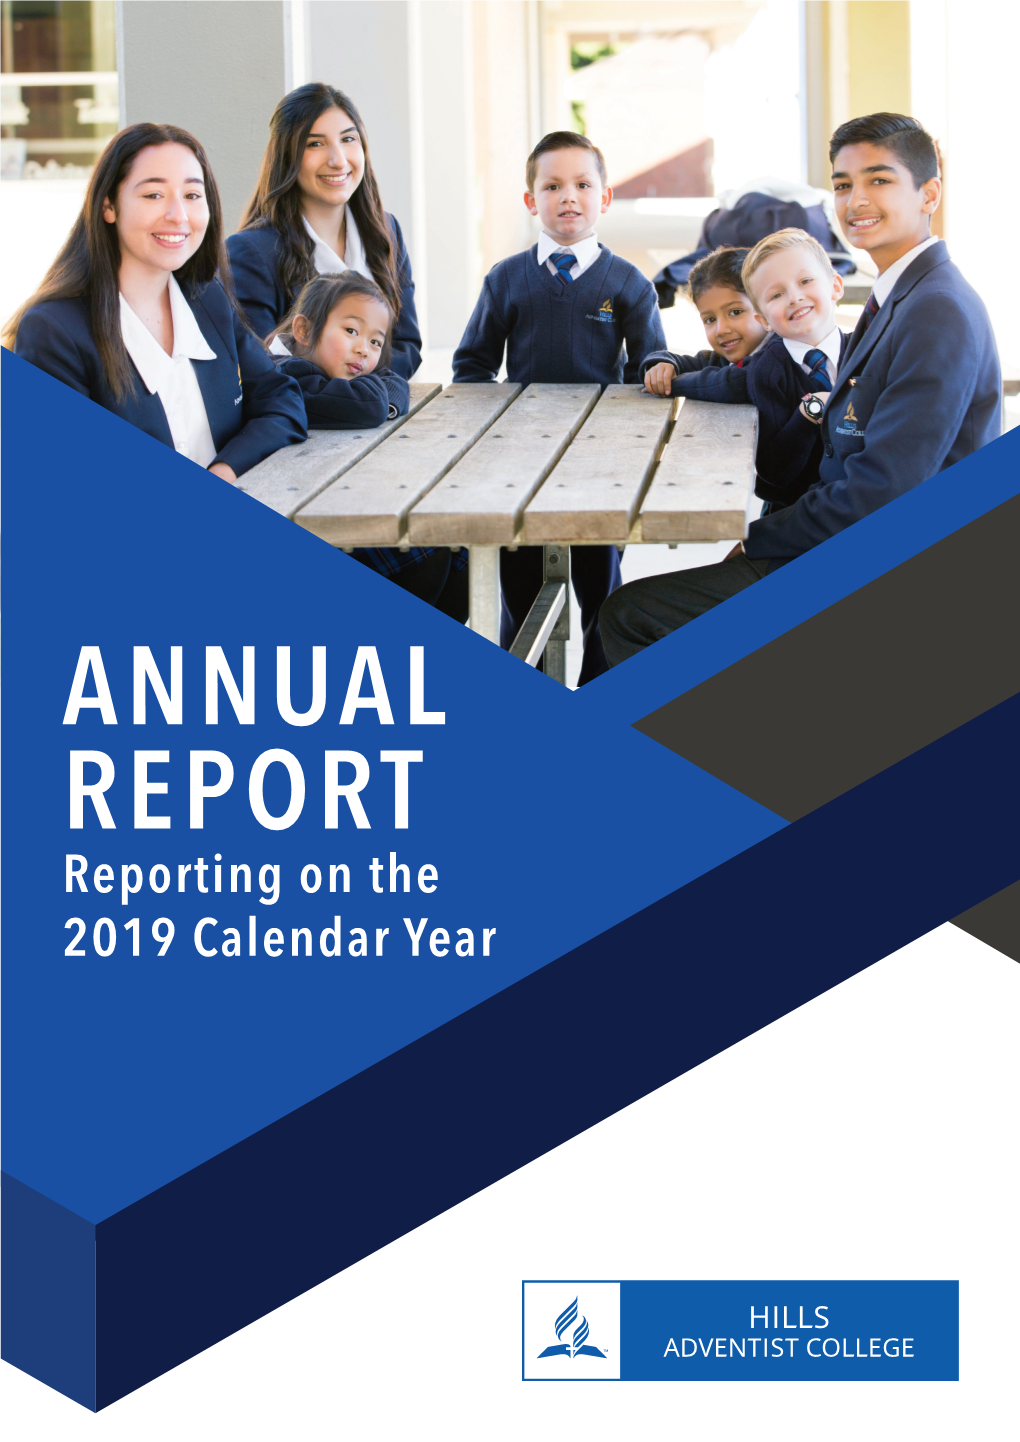 ANNUAL REPORT Reporting on the 2019 Calendar Year CONTENTS